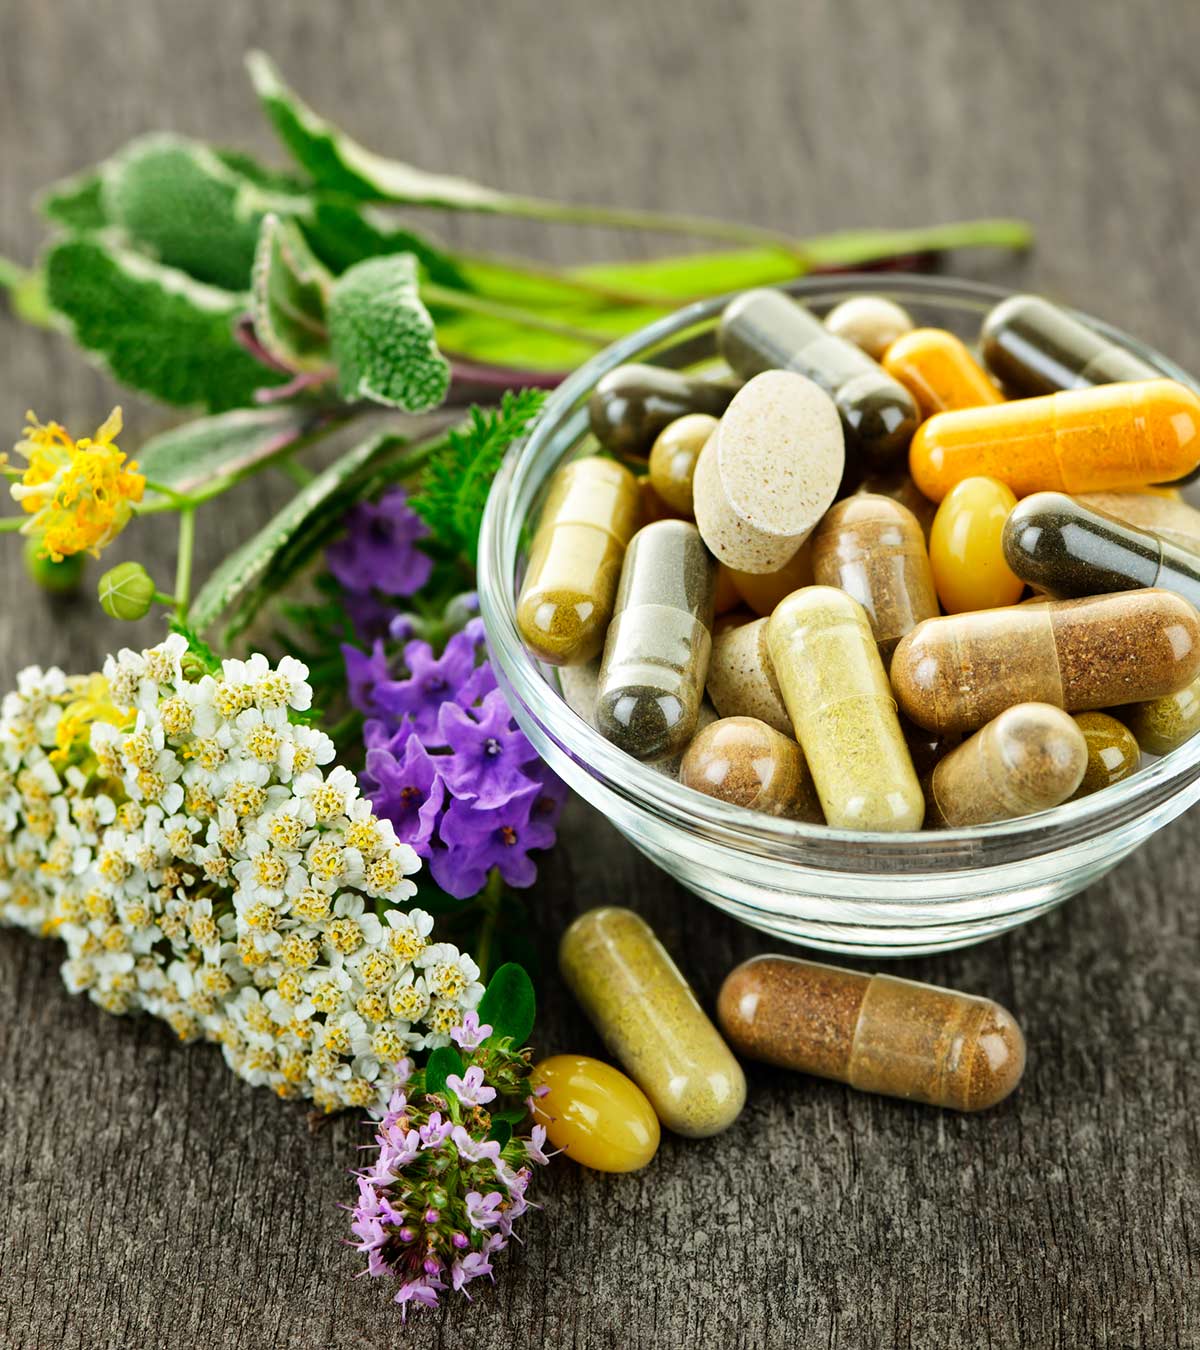 5 Best Gnc Multivitamins For Children And Teens To Take Care Of Their Health And Well-Being